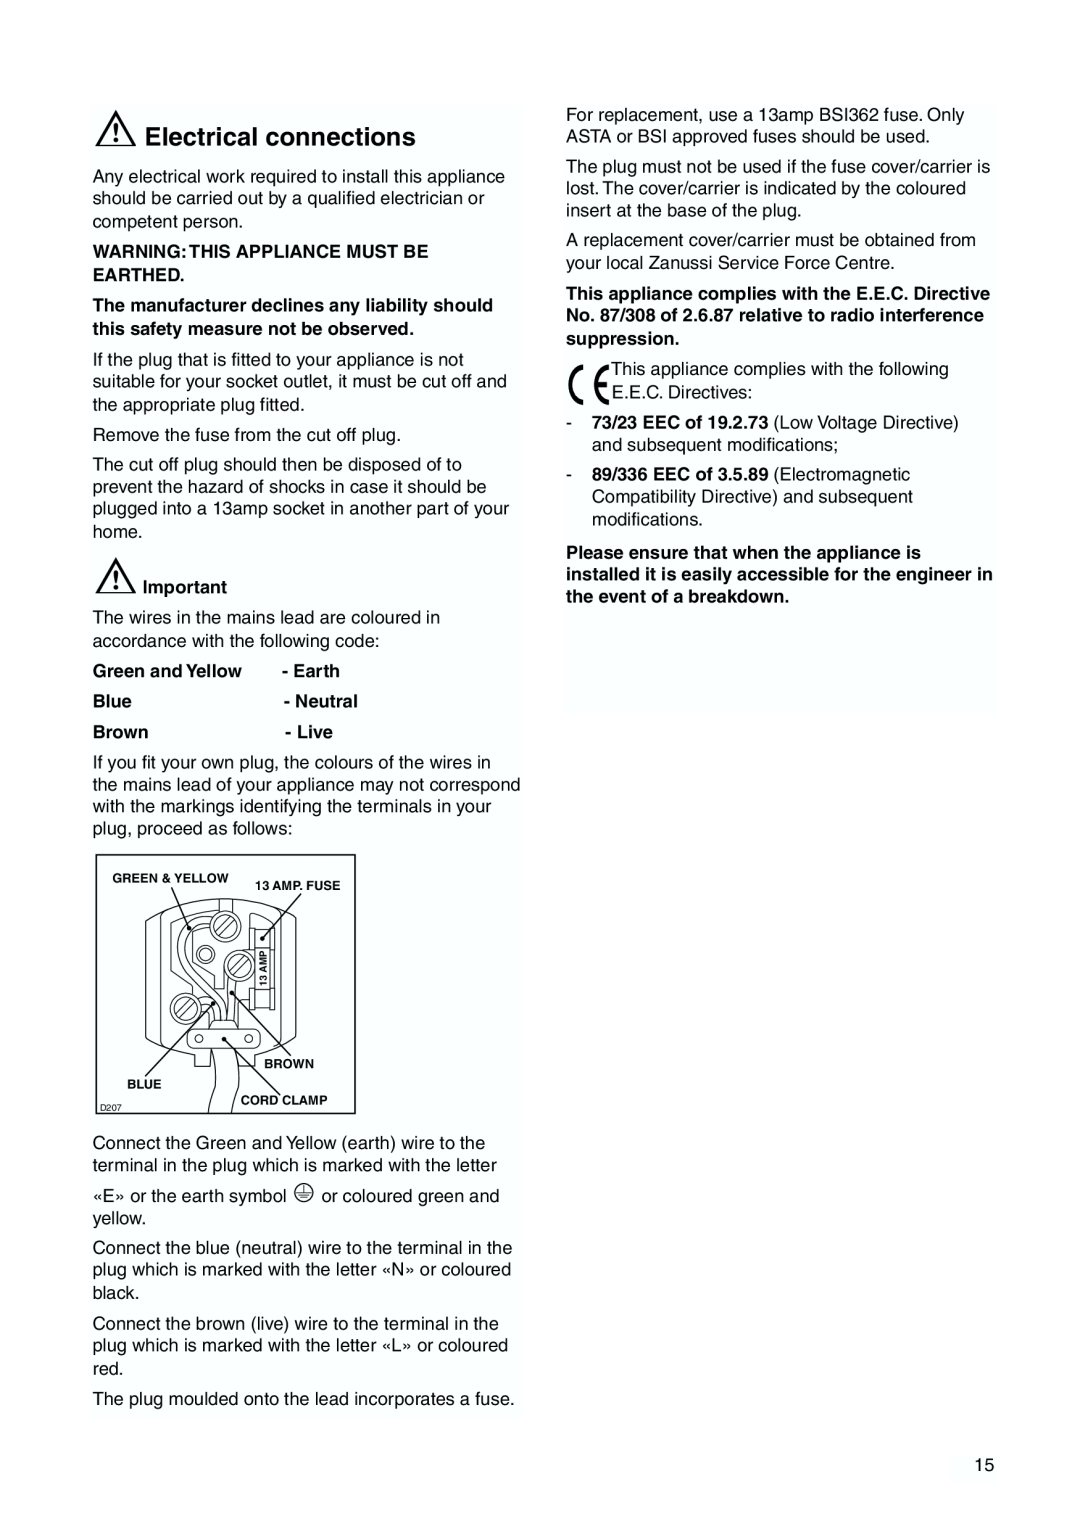 Zanussi ZBB6286 manual Electrical connections, Warning This Appliance Must Be Earthed, Green and Yellow 